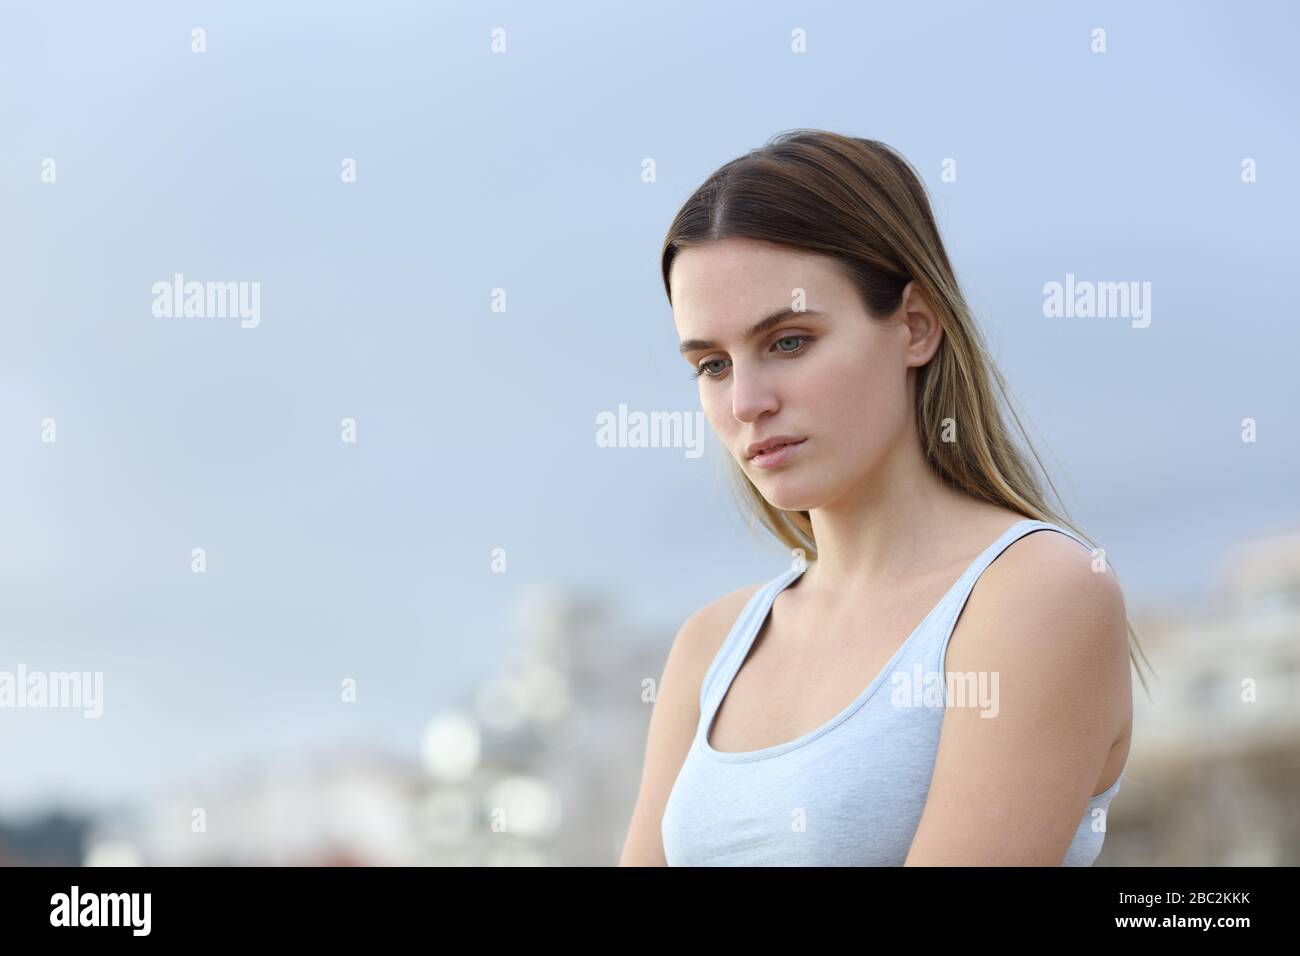 Sad woman complaining looking down in the street Stock Photo